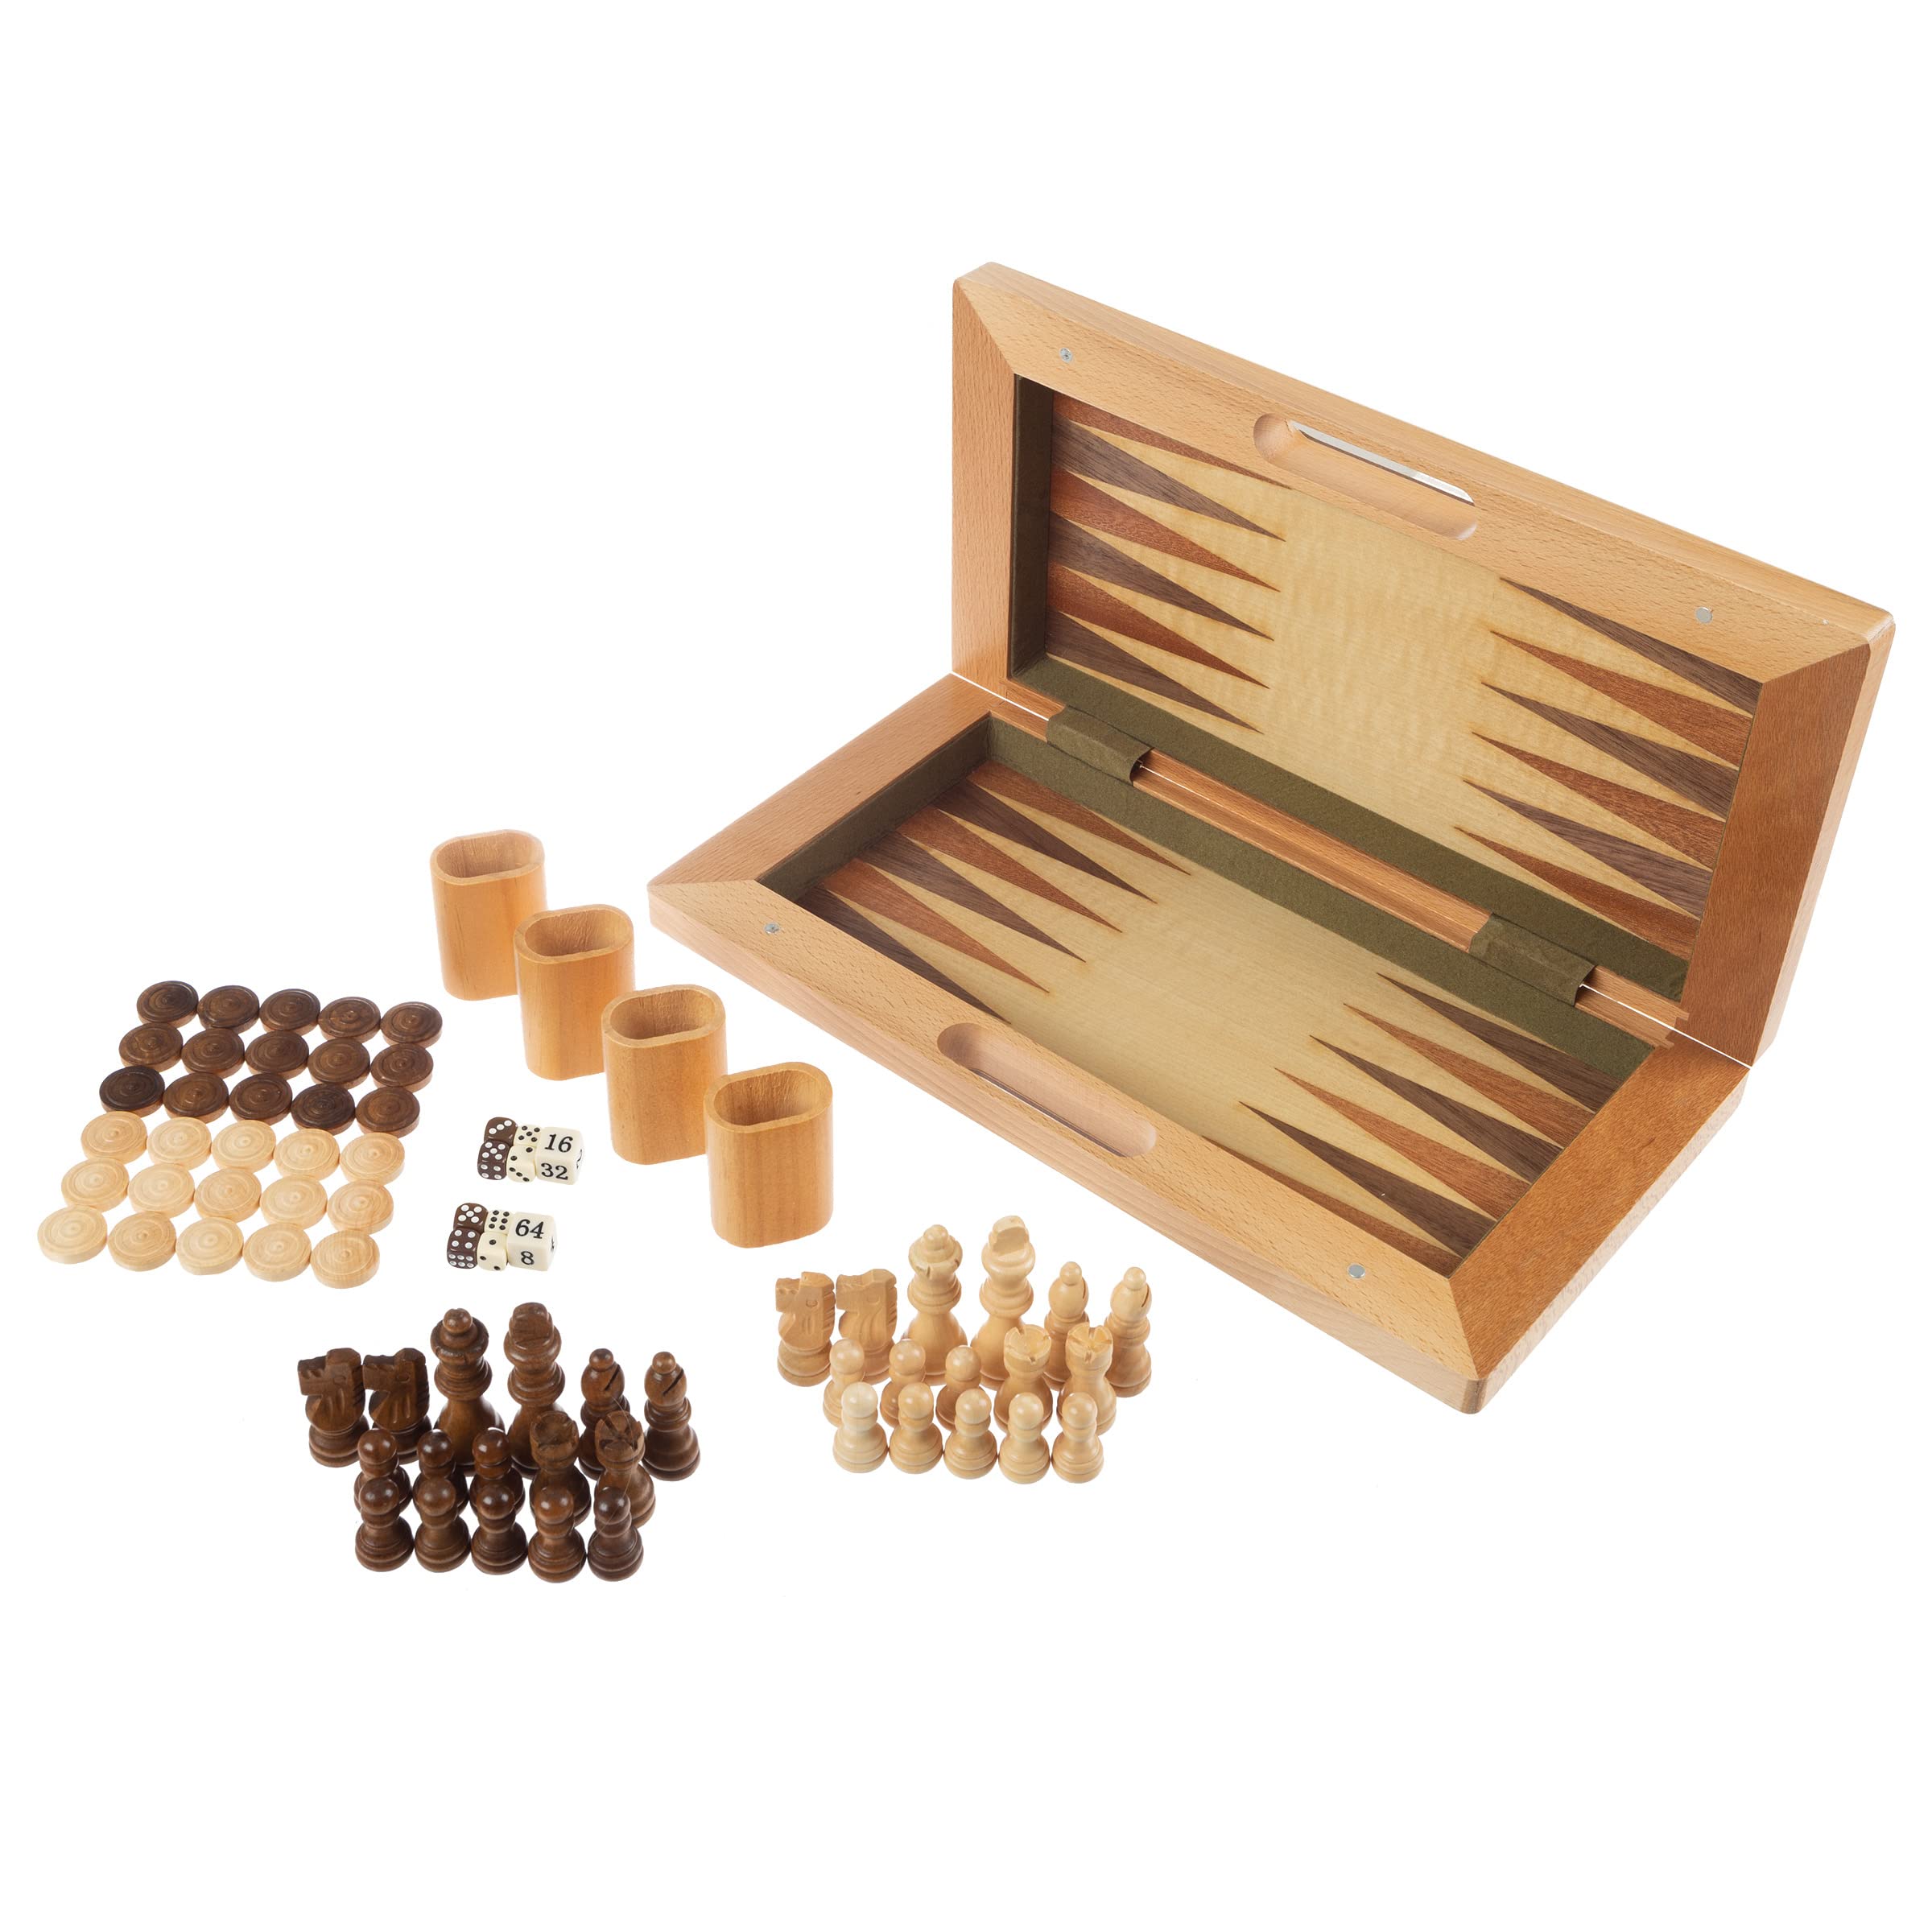 Trademark Games Hey! Play! Deluxe Wooden Chess, Checker and Backgammon Set, Brown